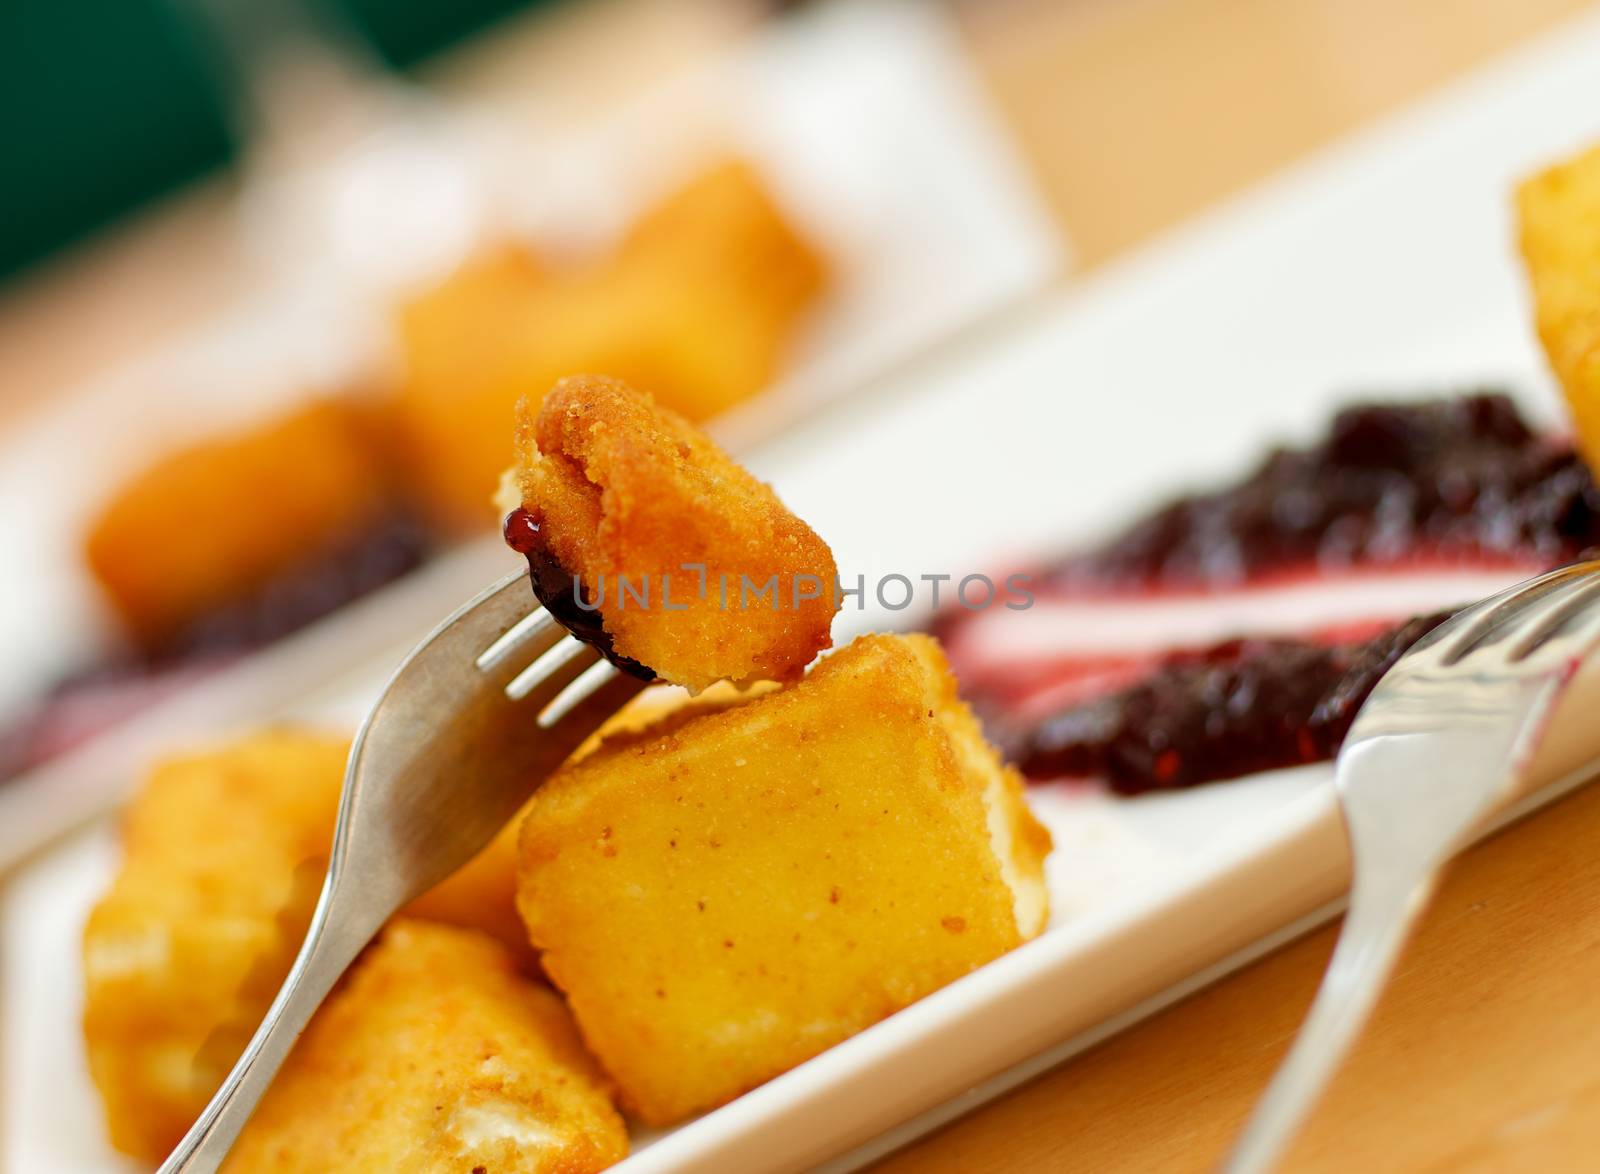 Breaded and Fried Camembert Cheese Served on White Plate with Cranberry Jam and Silver Forks. Focus on Foreground 